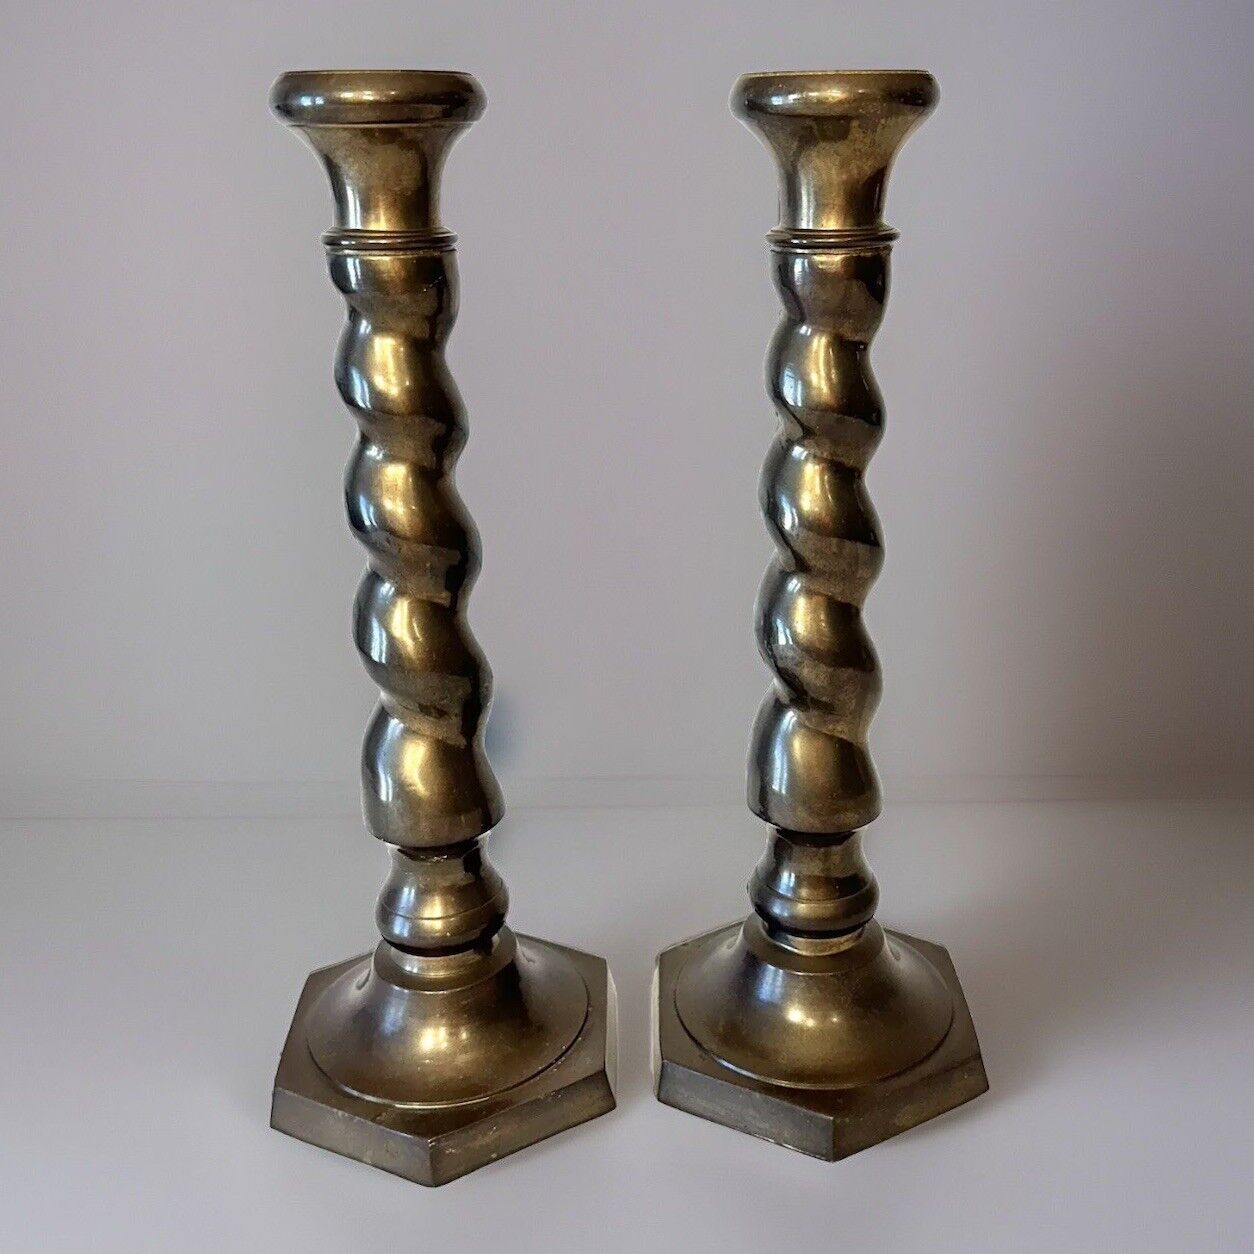 2 India Brass Candle Stick Holders Twisted Heavy Vintage For Candlesticks Towle